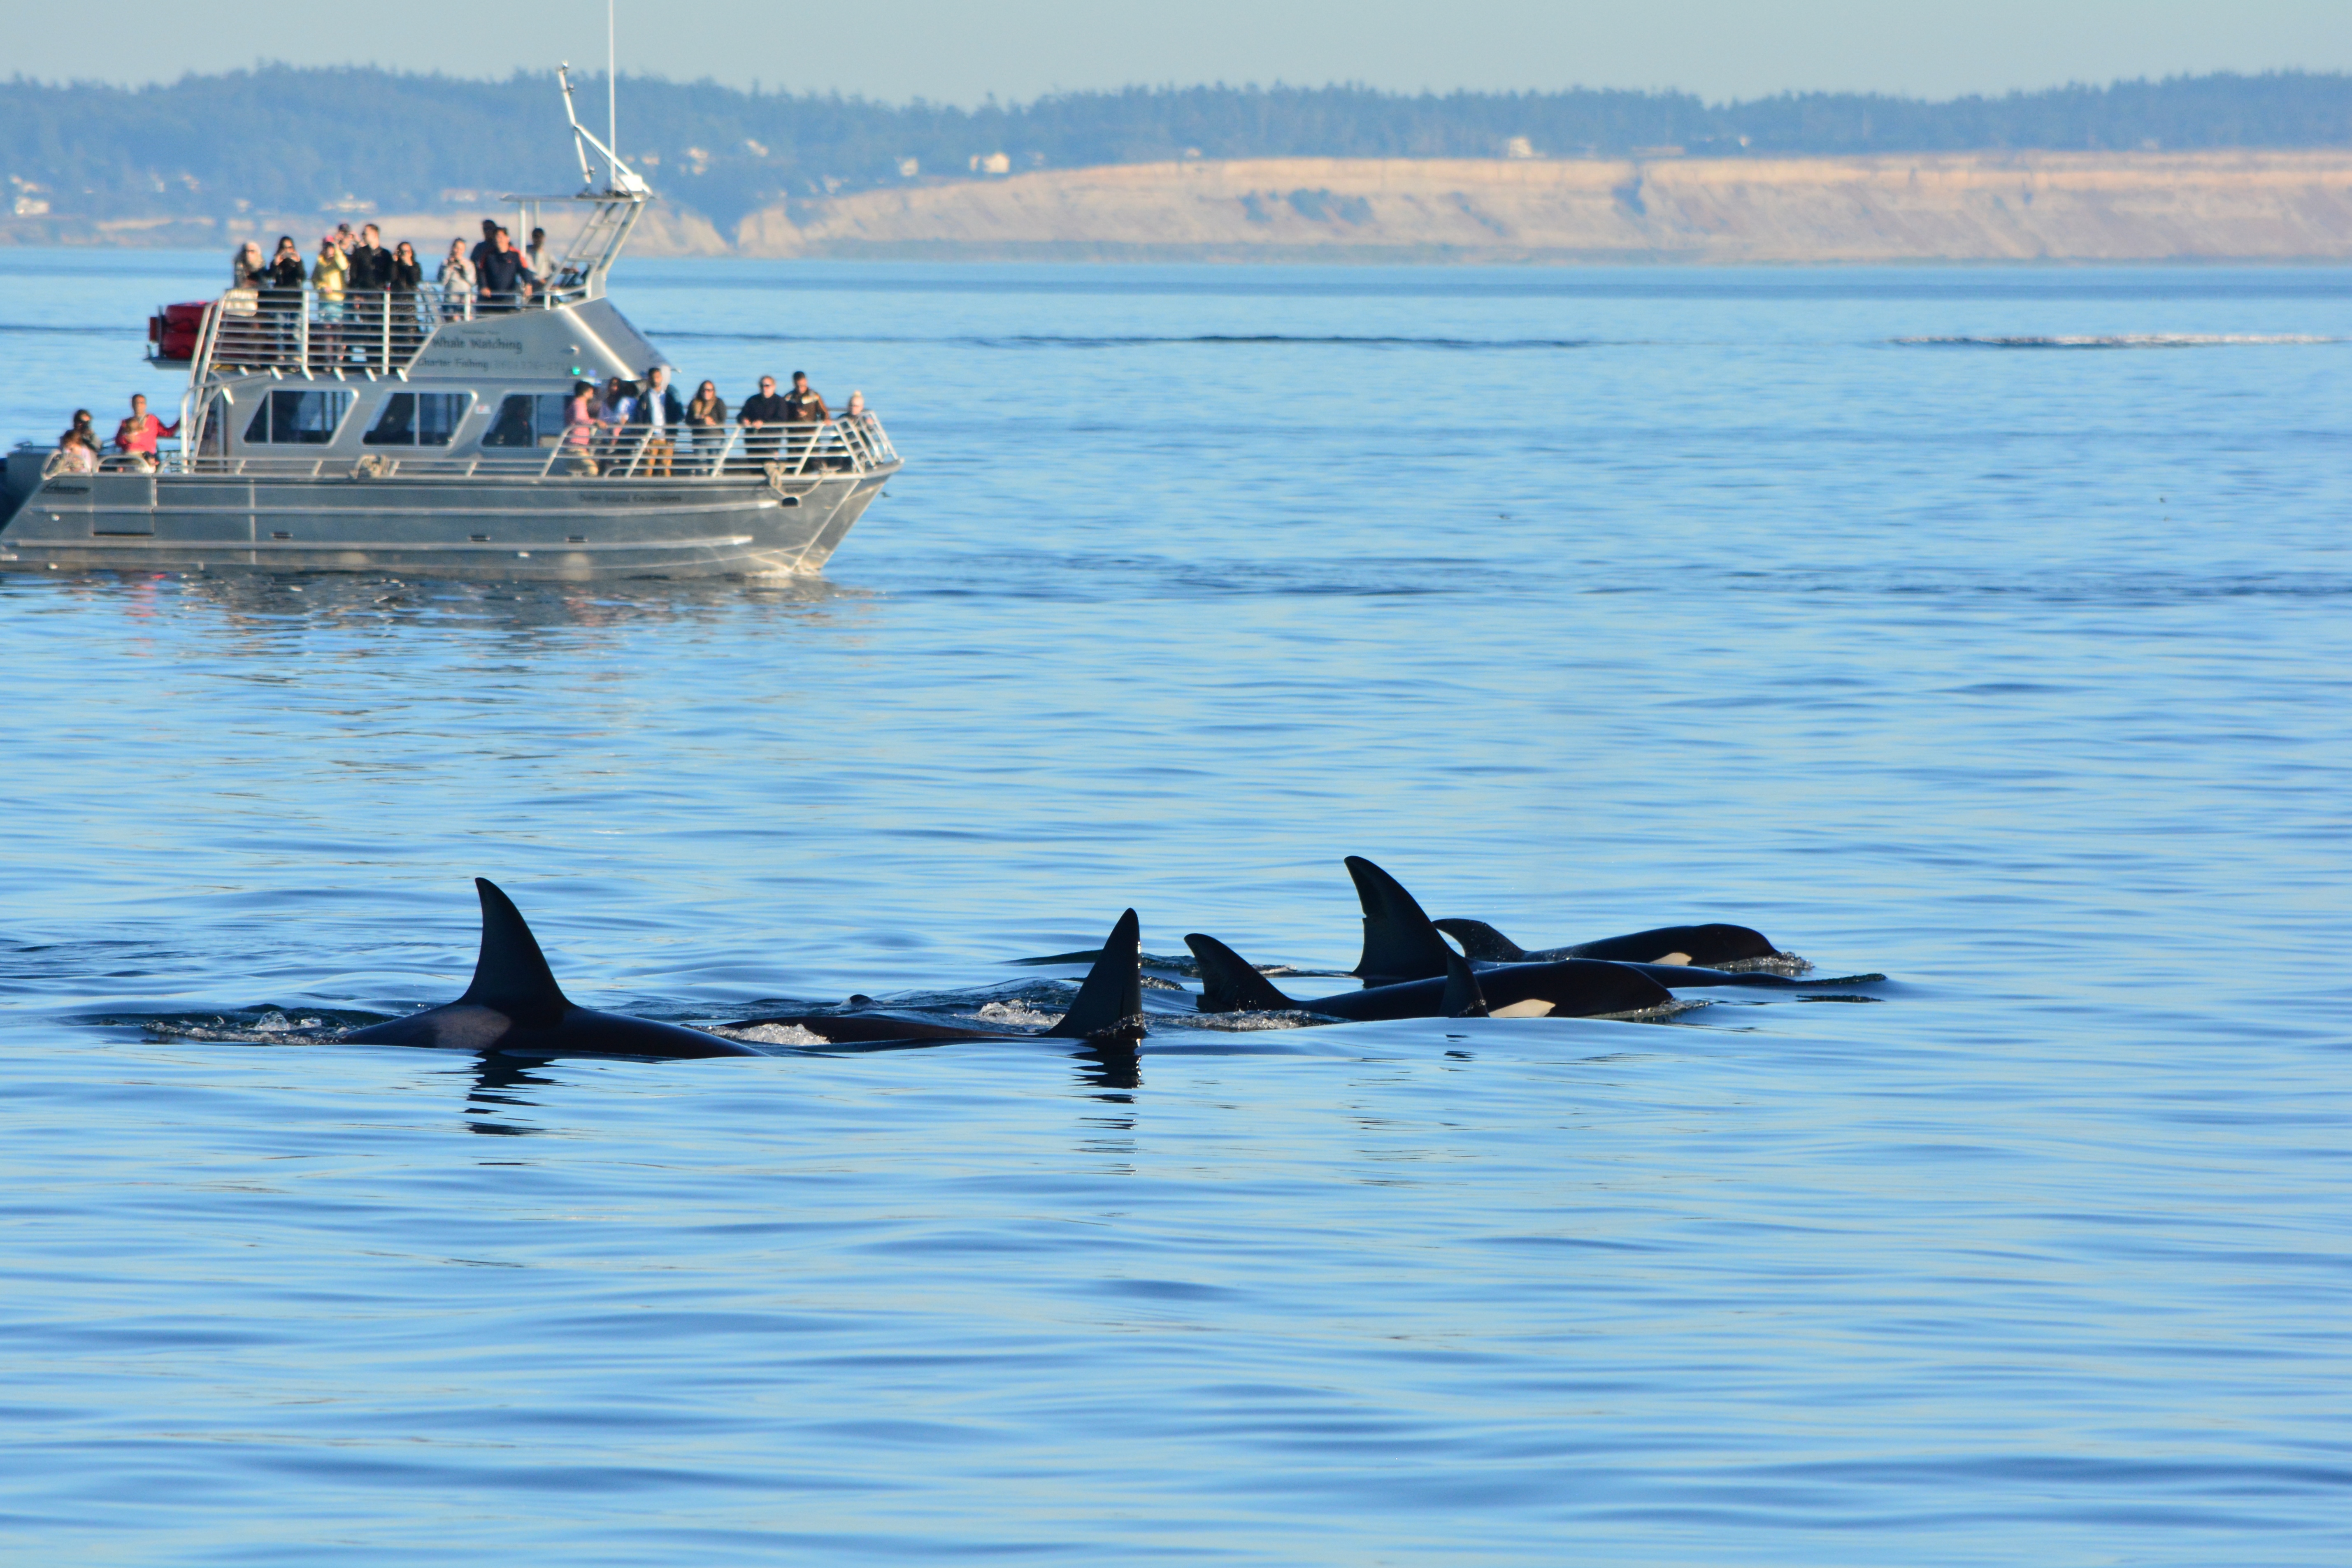 The Whole Family Together – T37’s and T34’s Cruising Bellingham Channel and Strait of Juan de Fuca